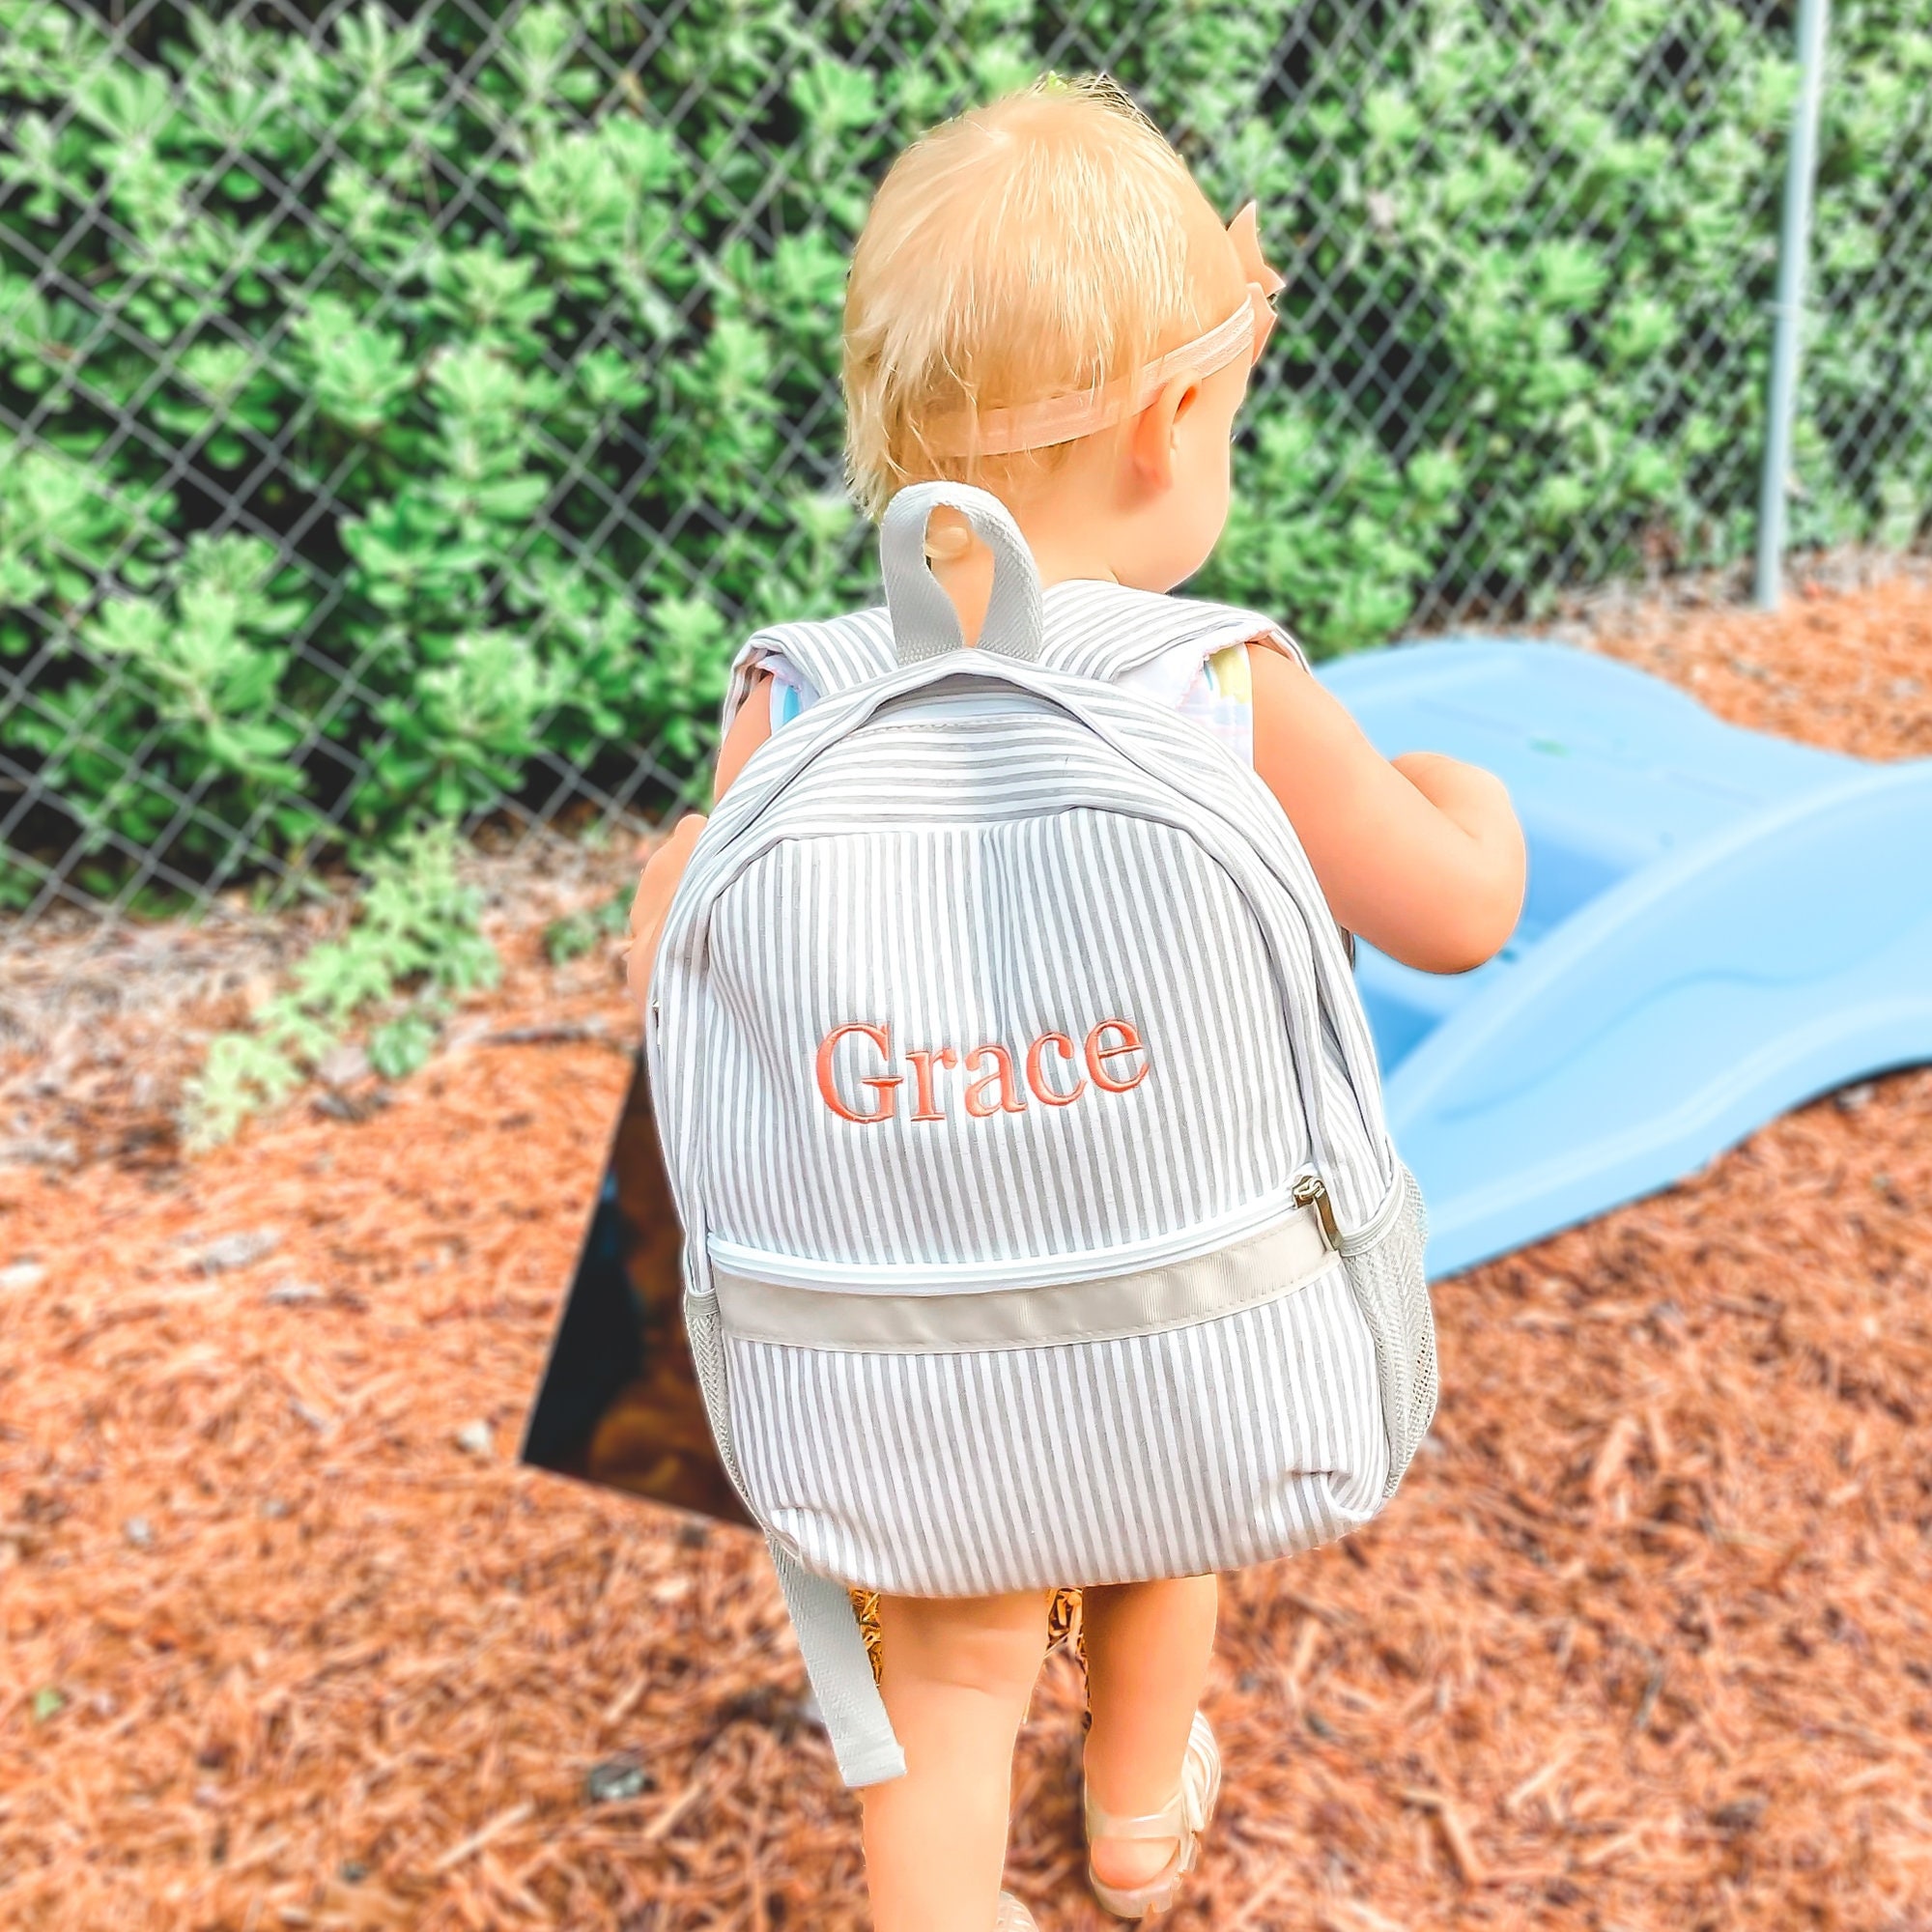 Personalized Small Backpack — The Children's Shop